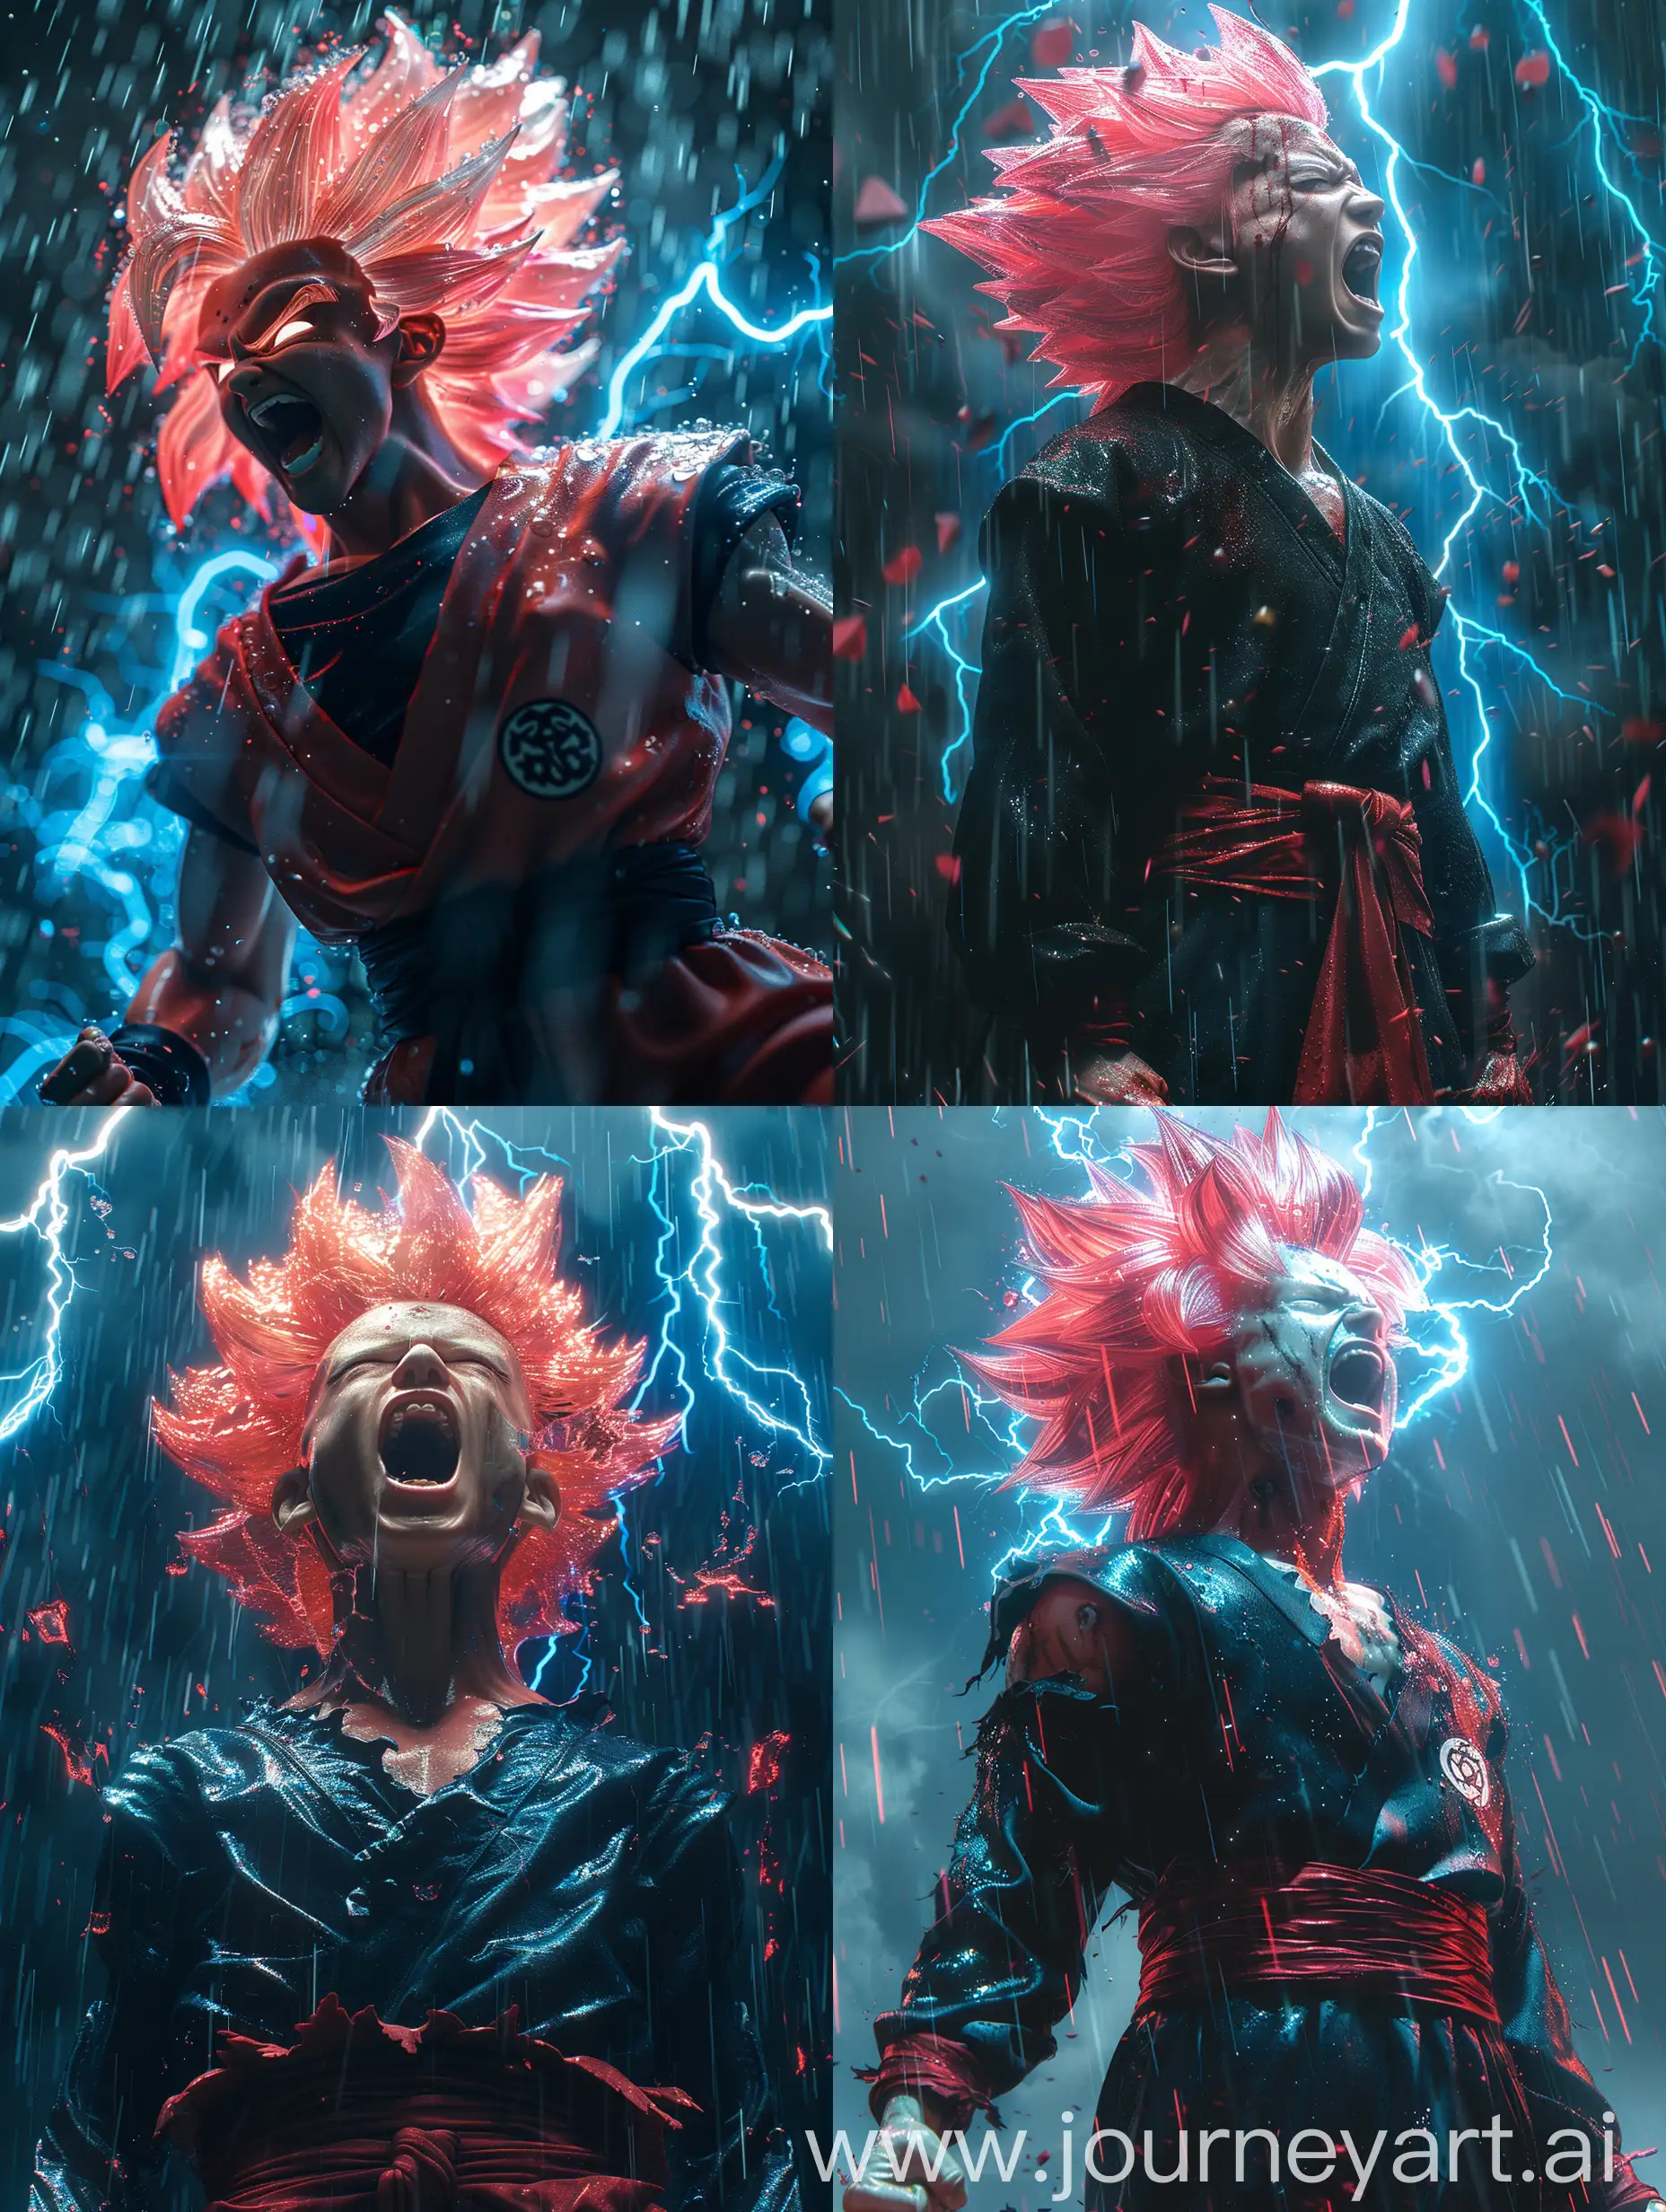 Real full body portrait of real person as Goku black super saiyan 3 rose with rose hair and black
outfit in fighting pose, by Rudy Siswanto, , fully defined facial features of Goku black super saiyan rose, mouth open, neon aura, blue neon lightnings and thunders, clouds tearing apart, ground shattering, ethereal portraiture, tonalist, color scheme, pensive stillness, dark aquamarine and red, rainy night, ray tracing, high reflection, dramatic lighting, intricate details, photo realism, hyperrealism, hyperrealistic photorealistic, 85-mm-lens crispy detail 8k UHD HDR, high key lighting
--ar 4:5 --v 6.0 --style raw --stylize 1000